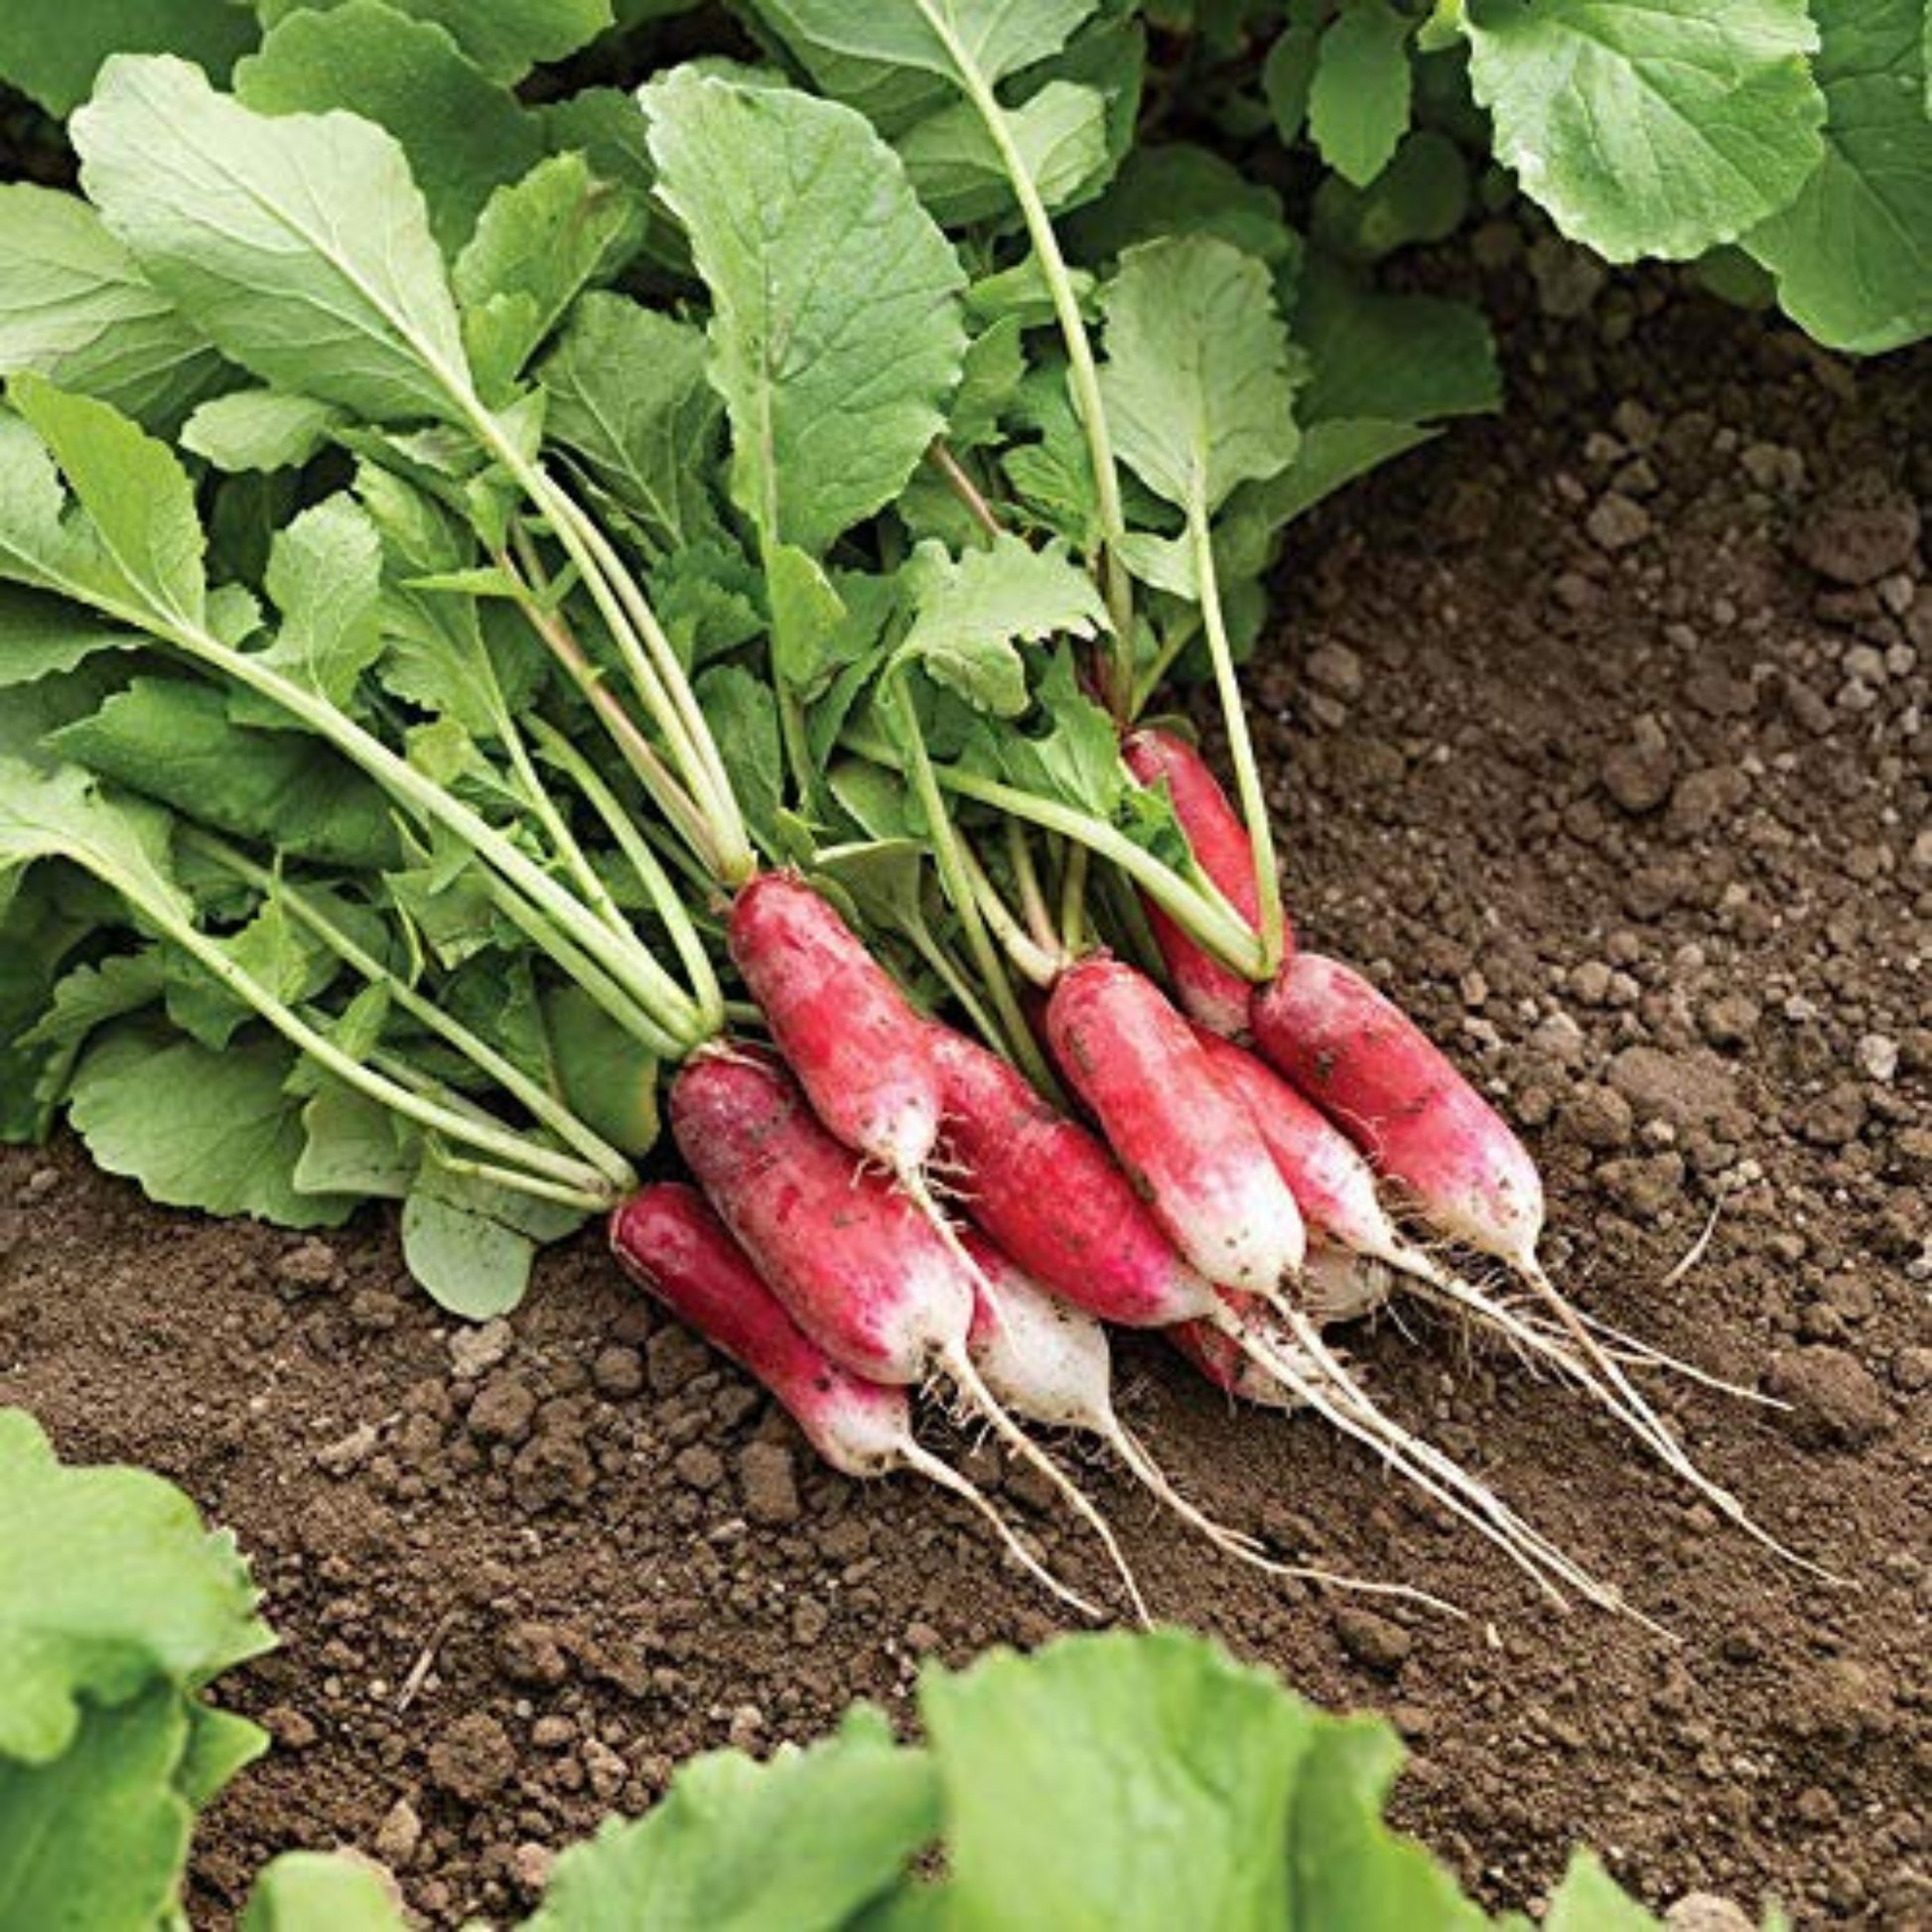 French Breakfast radish a popular choice for gardeners. Le radis French Breakfast est un choix populaire pour les jardiniers.